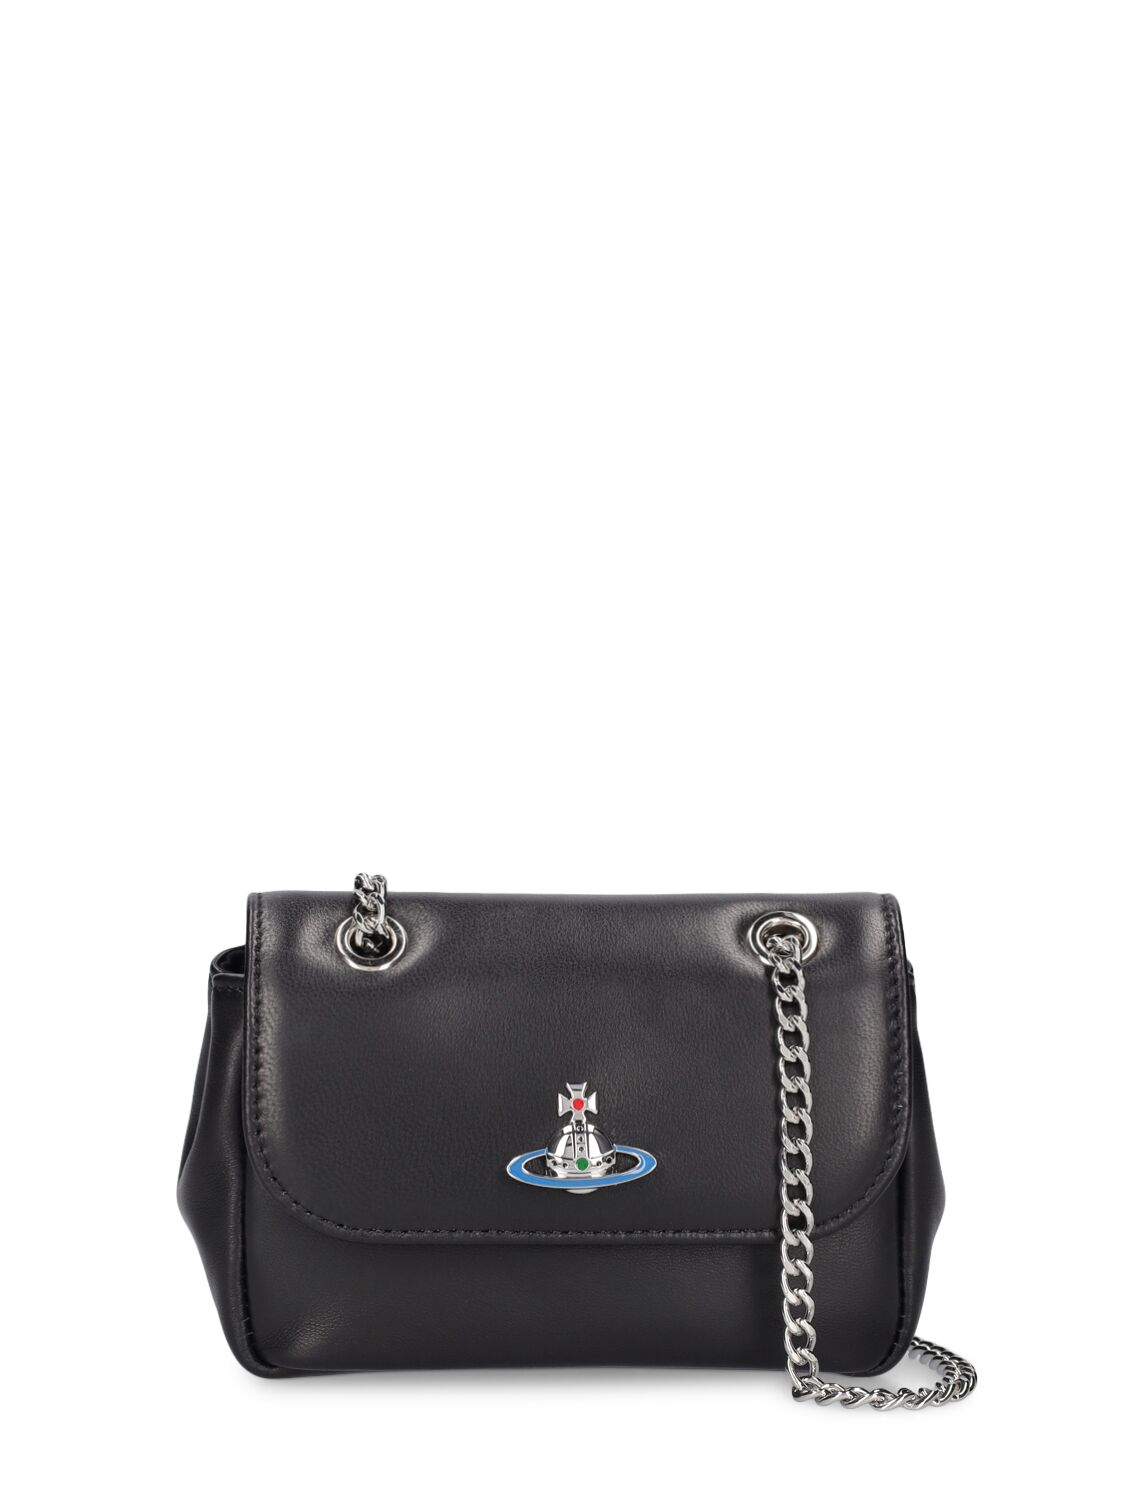 Vivienne Westwood Small Leather Shoulder Bag W/chain In Black